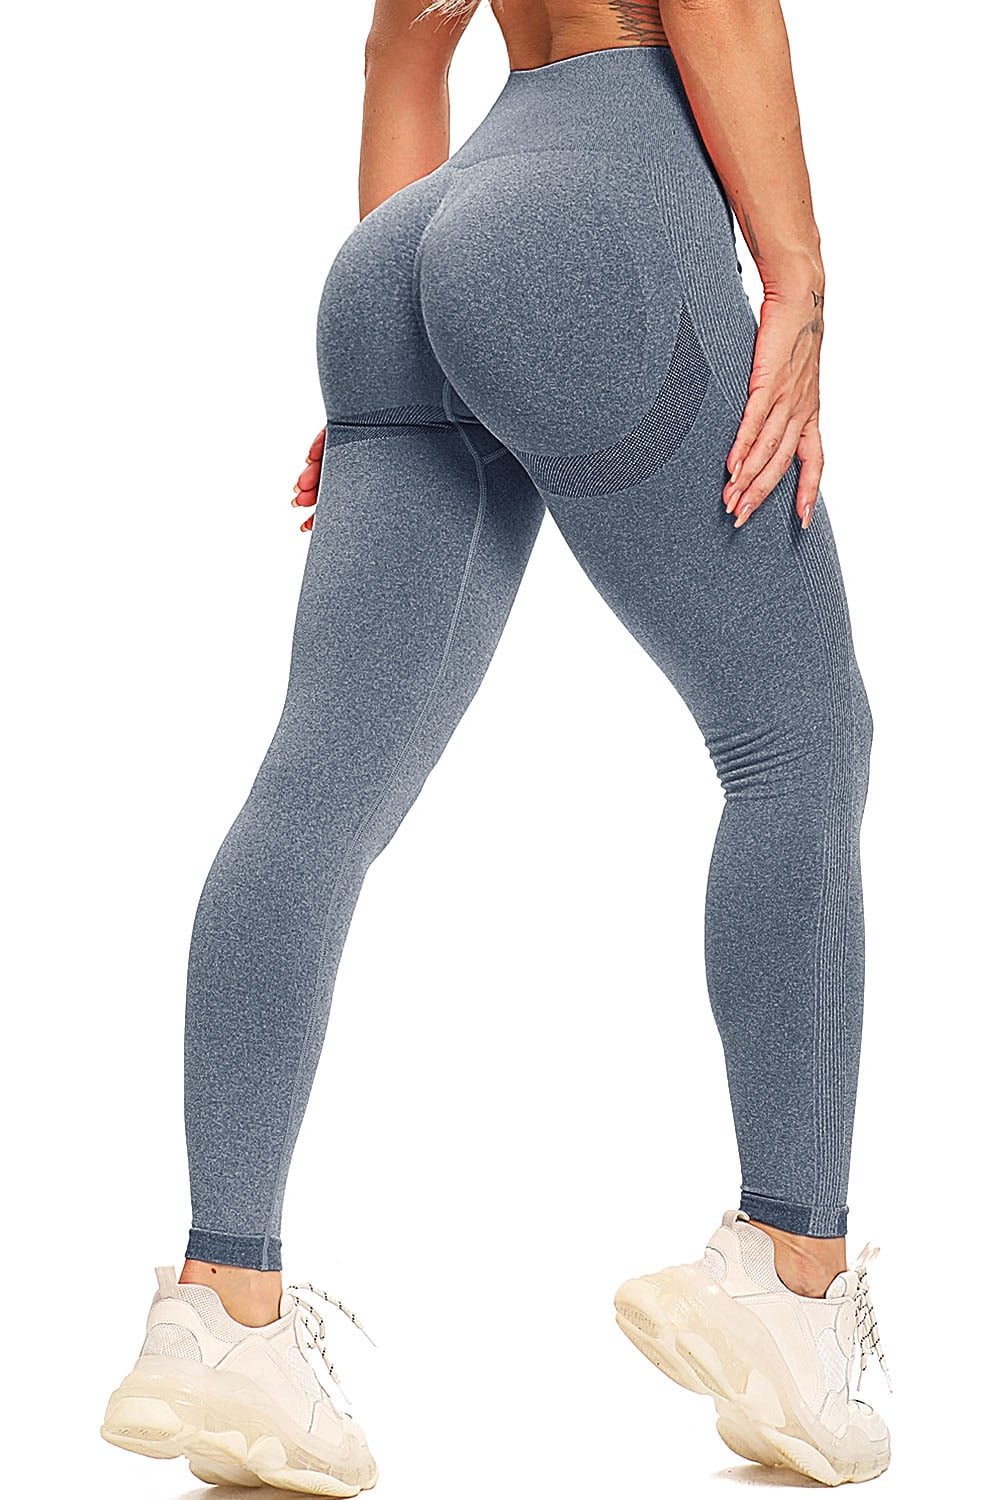 NORMOV High Waist Seamless Gym Leggings for Women Hollow Compression Workout Yoga Pants 